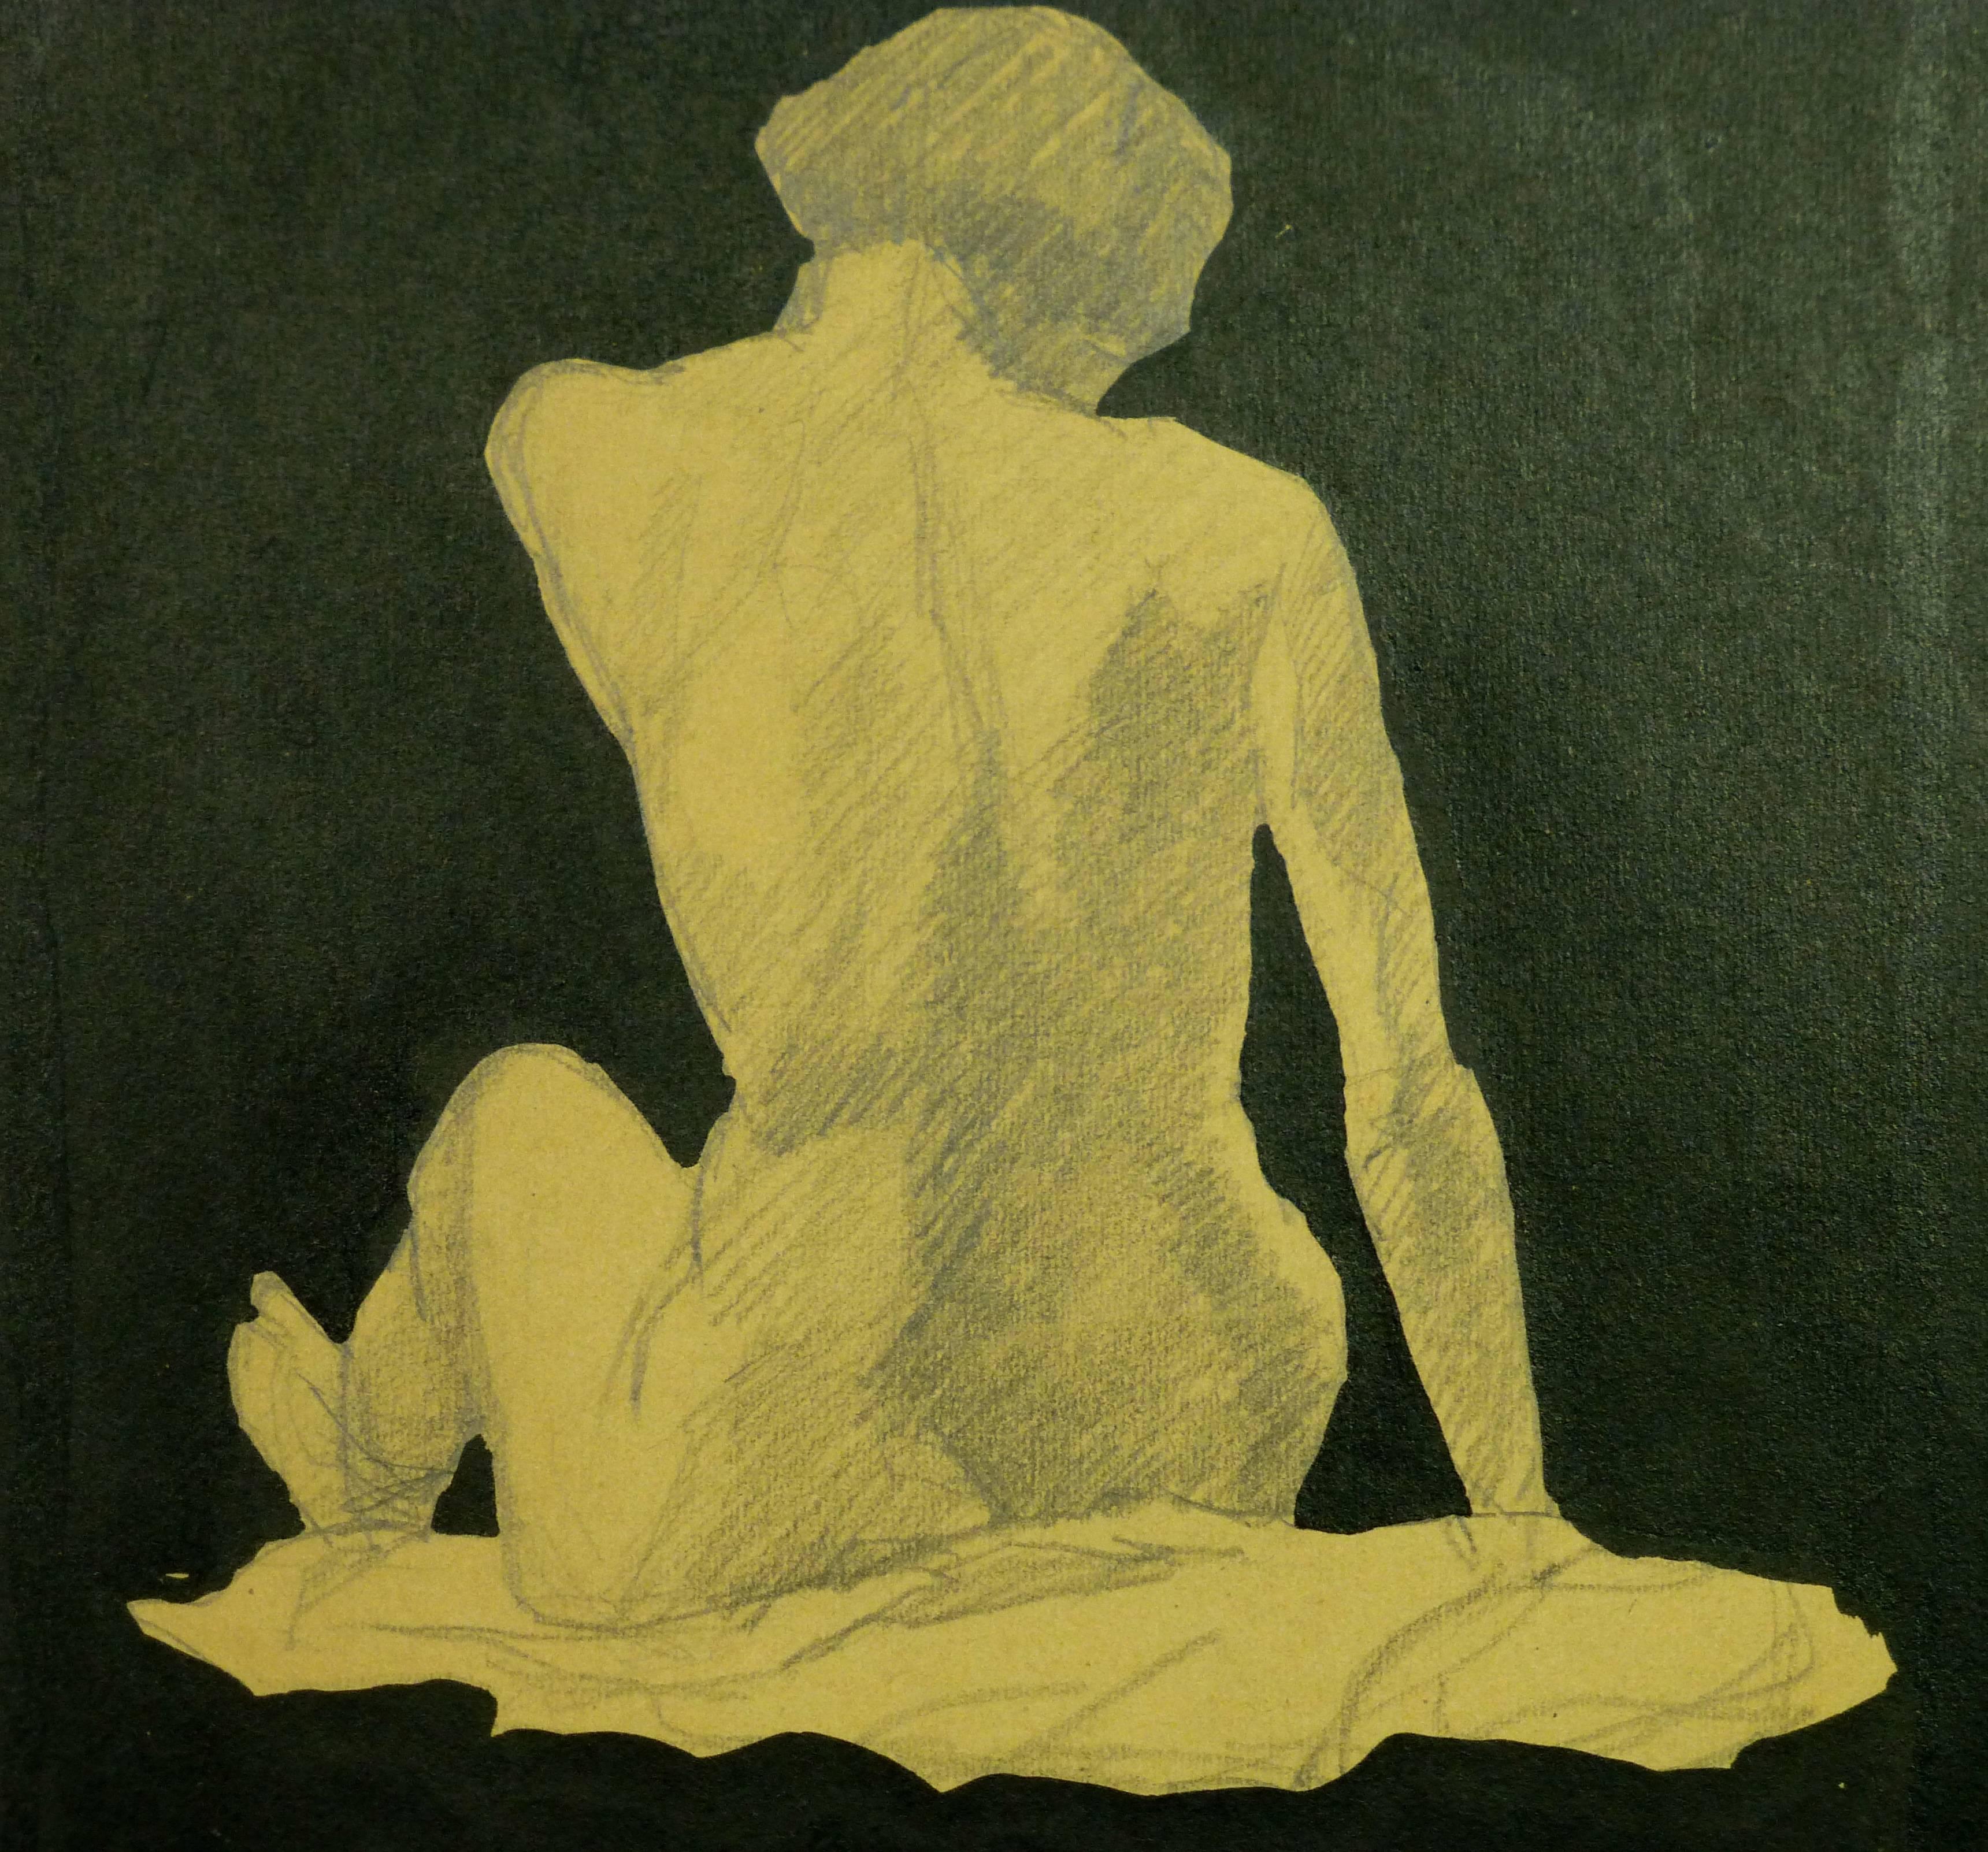 Mesmerizing pencil and ink drawing of nude figure, circa 1920.

Original artwork on paper displayed on a white mat with a gold border. Mat fits a standard-sized frame. Archival plastic sleeve and Certificate of Authenticity included. Artwork,